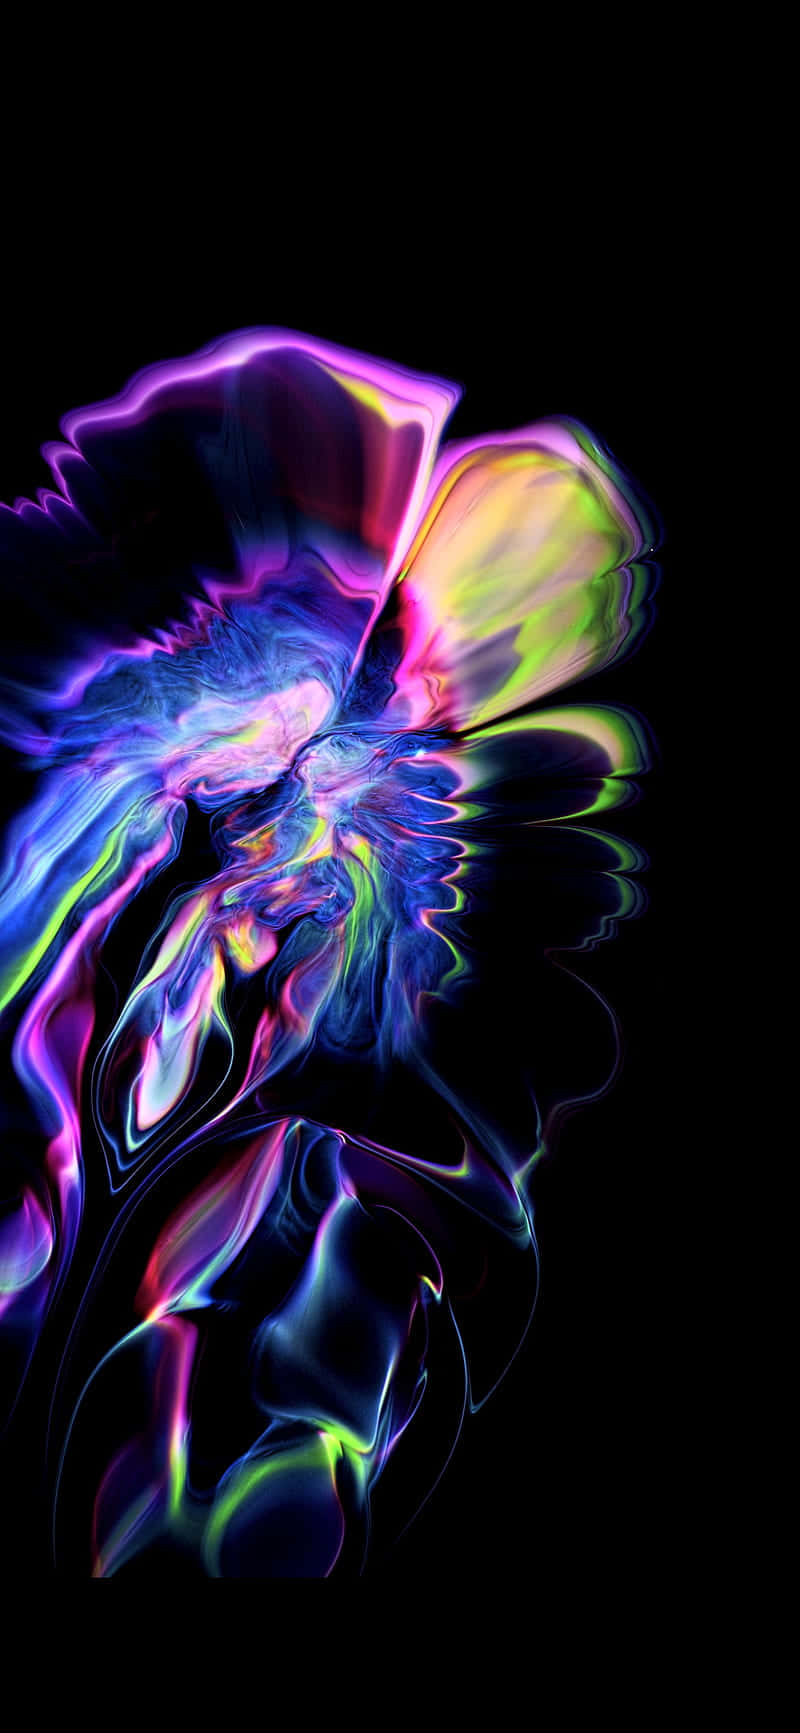 Colorful Abstract Super Amoled Display Flower Wallpaper